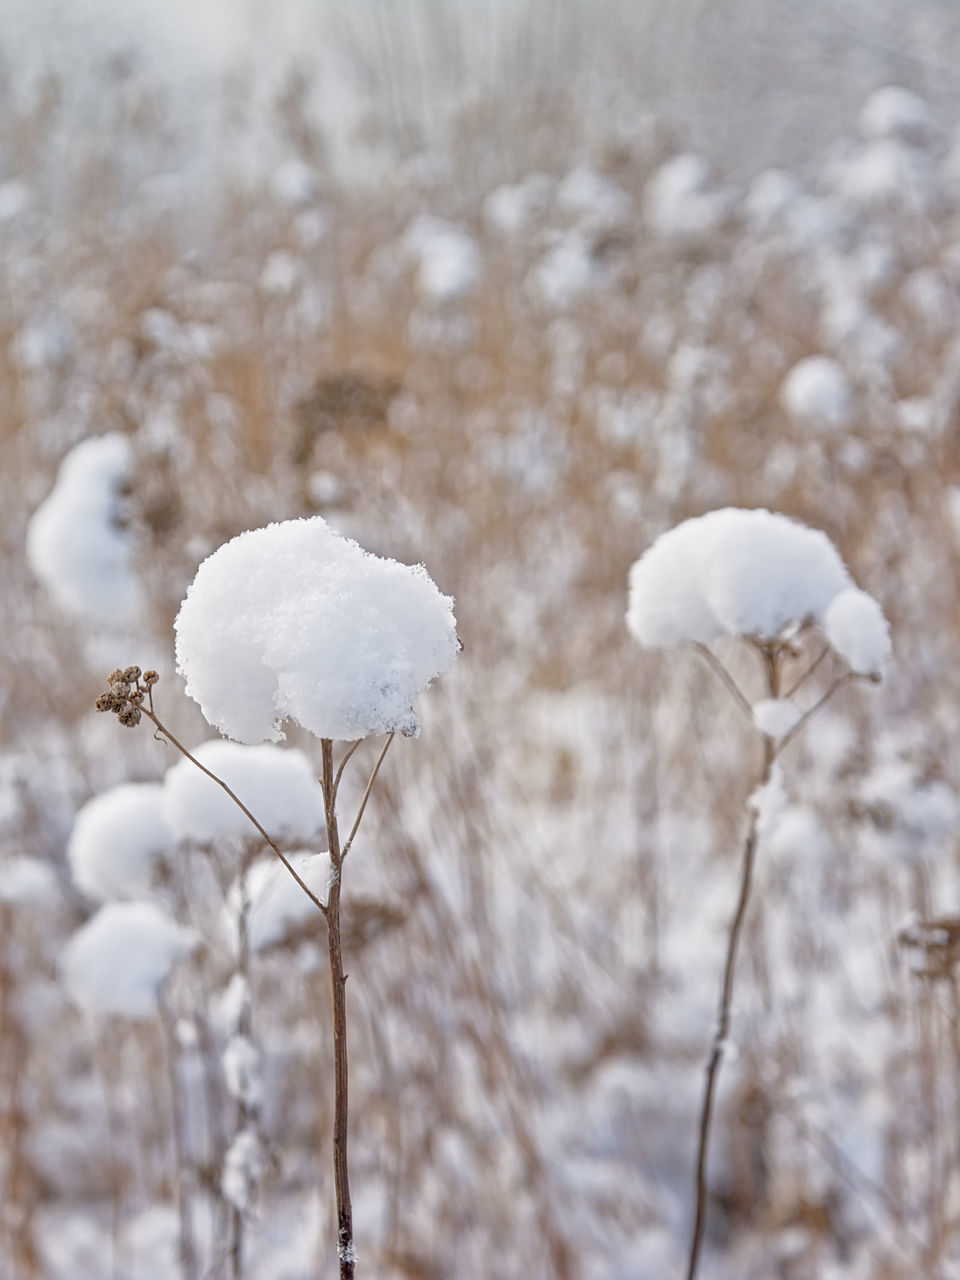 CLOSE-UP OF FROZEN WHITE FLOWER ON FIELD